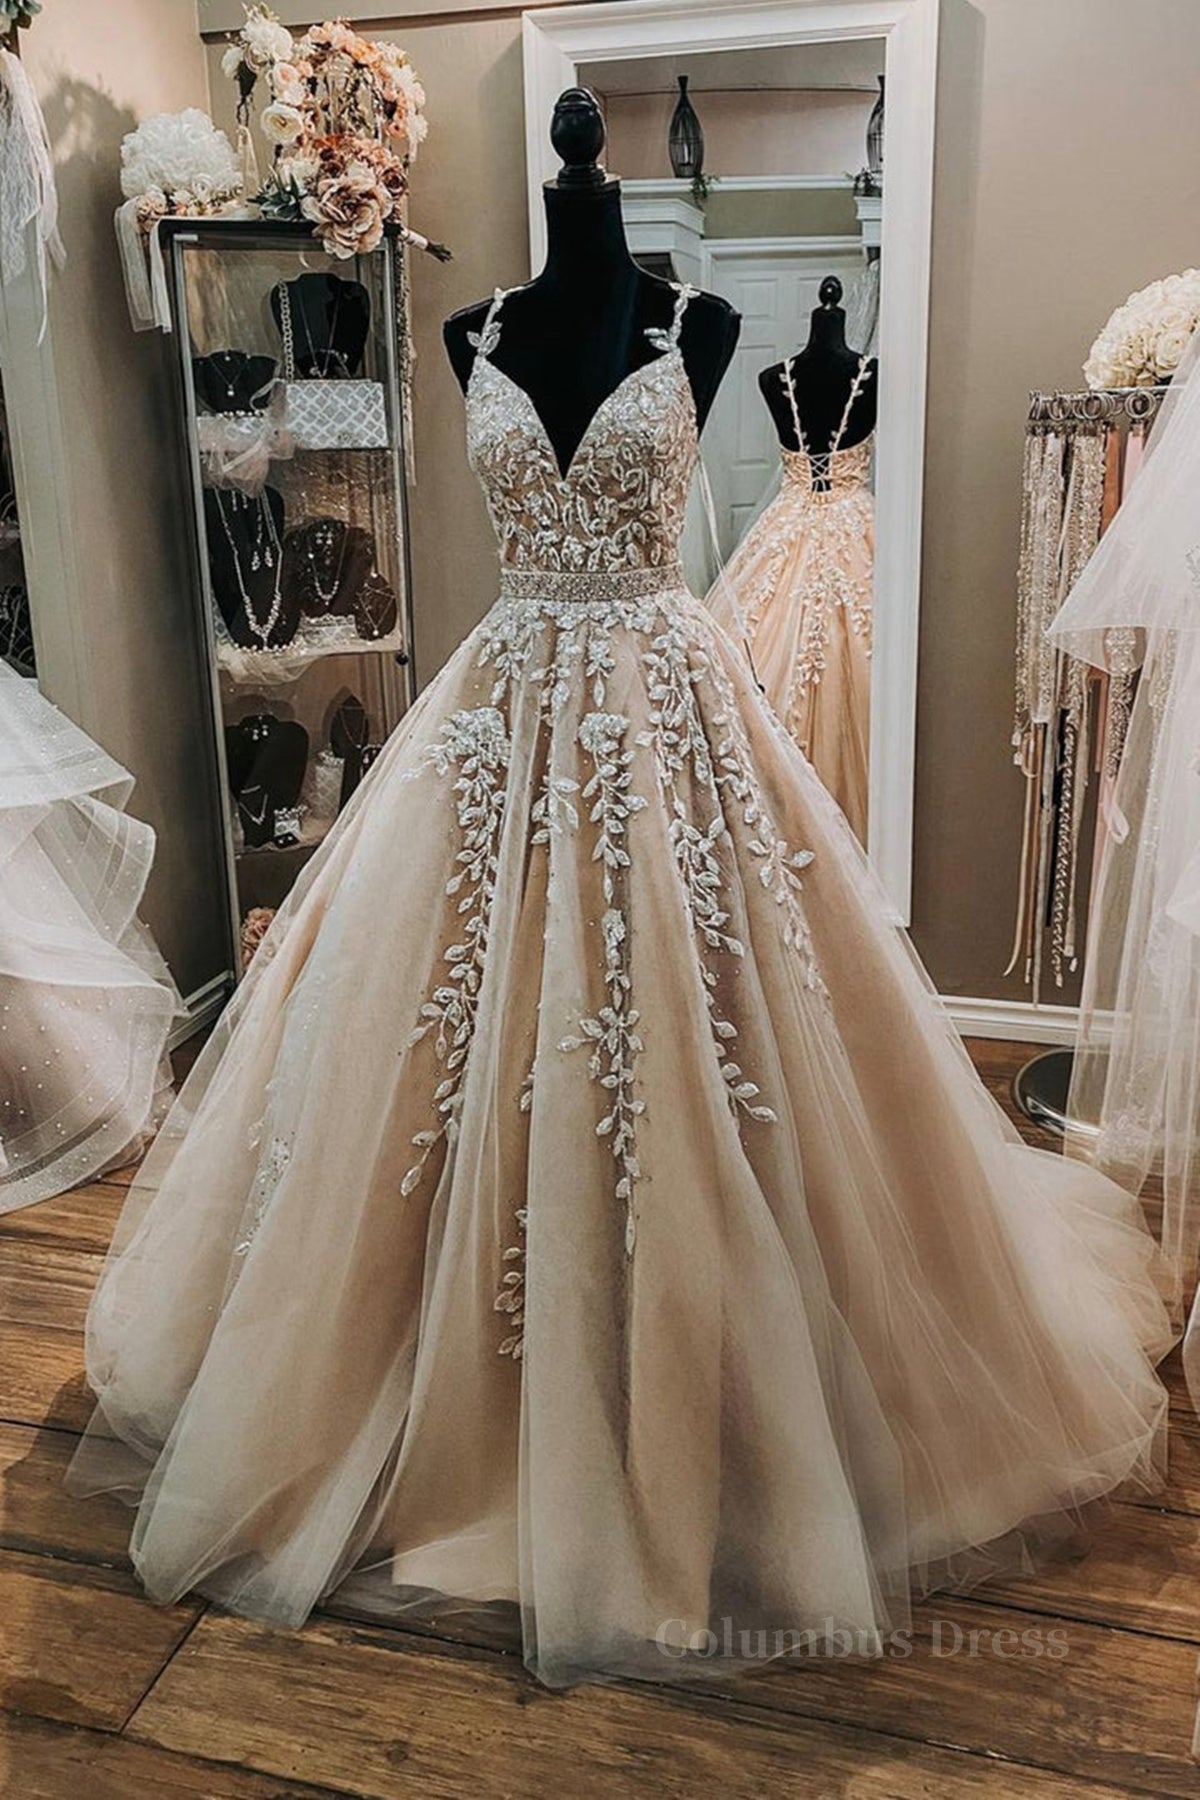 Bridesmaid Dresses Design, V Neck Open Back Champagne Tulle Lace Long Prom Dress with Belt, Champagne Lace Formal Evening Dress, Champagne Ball Gown